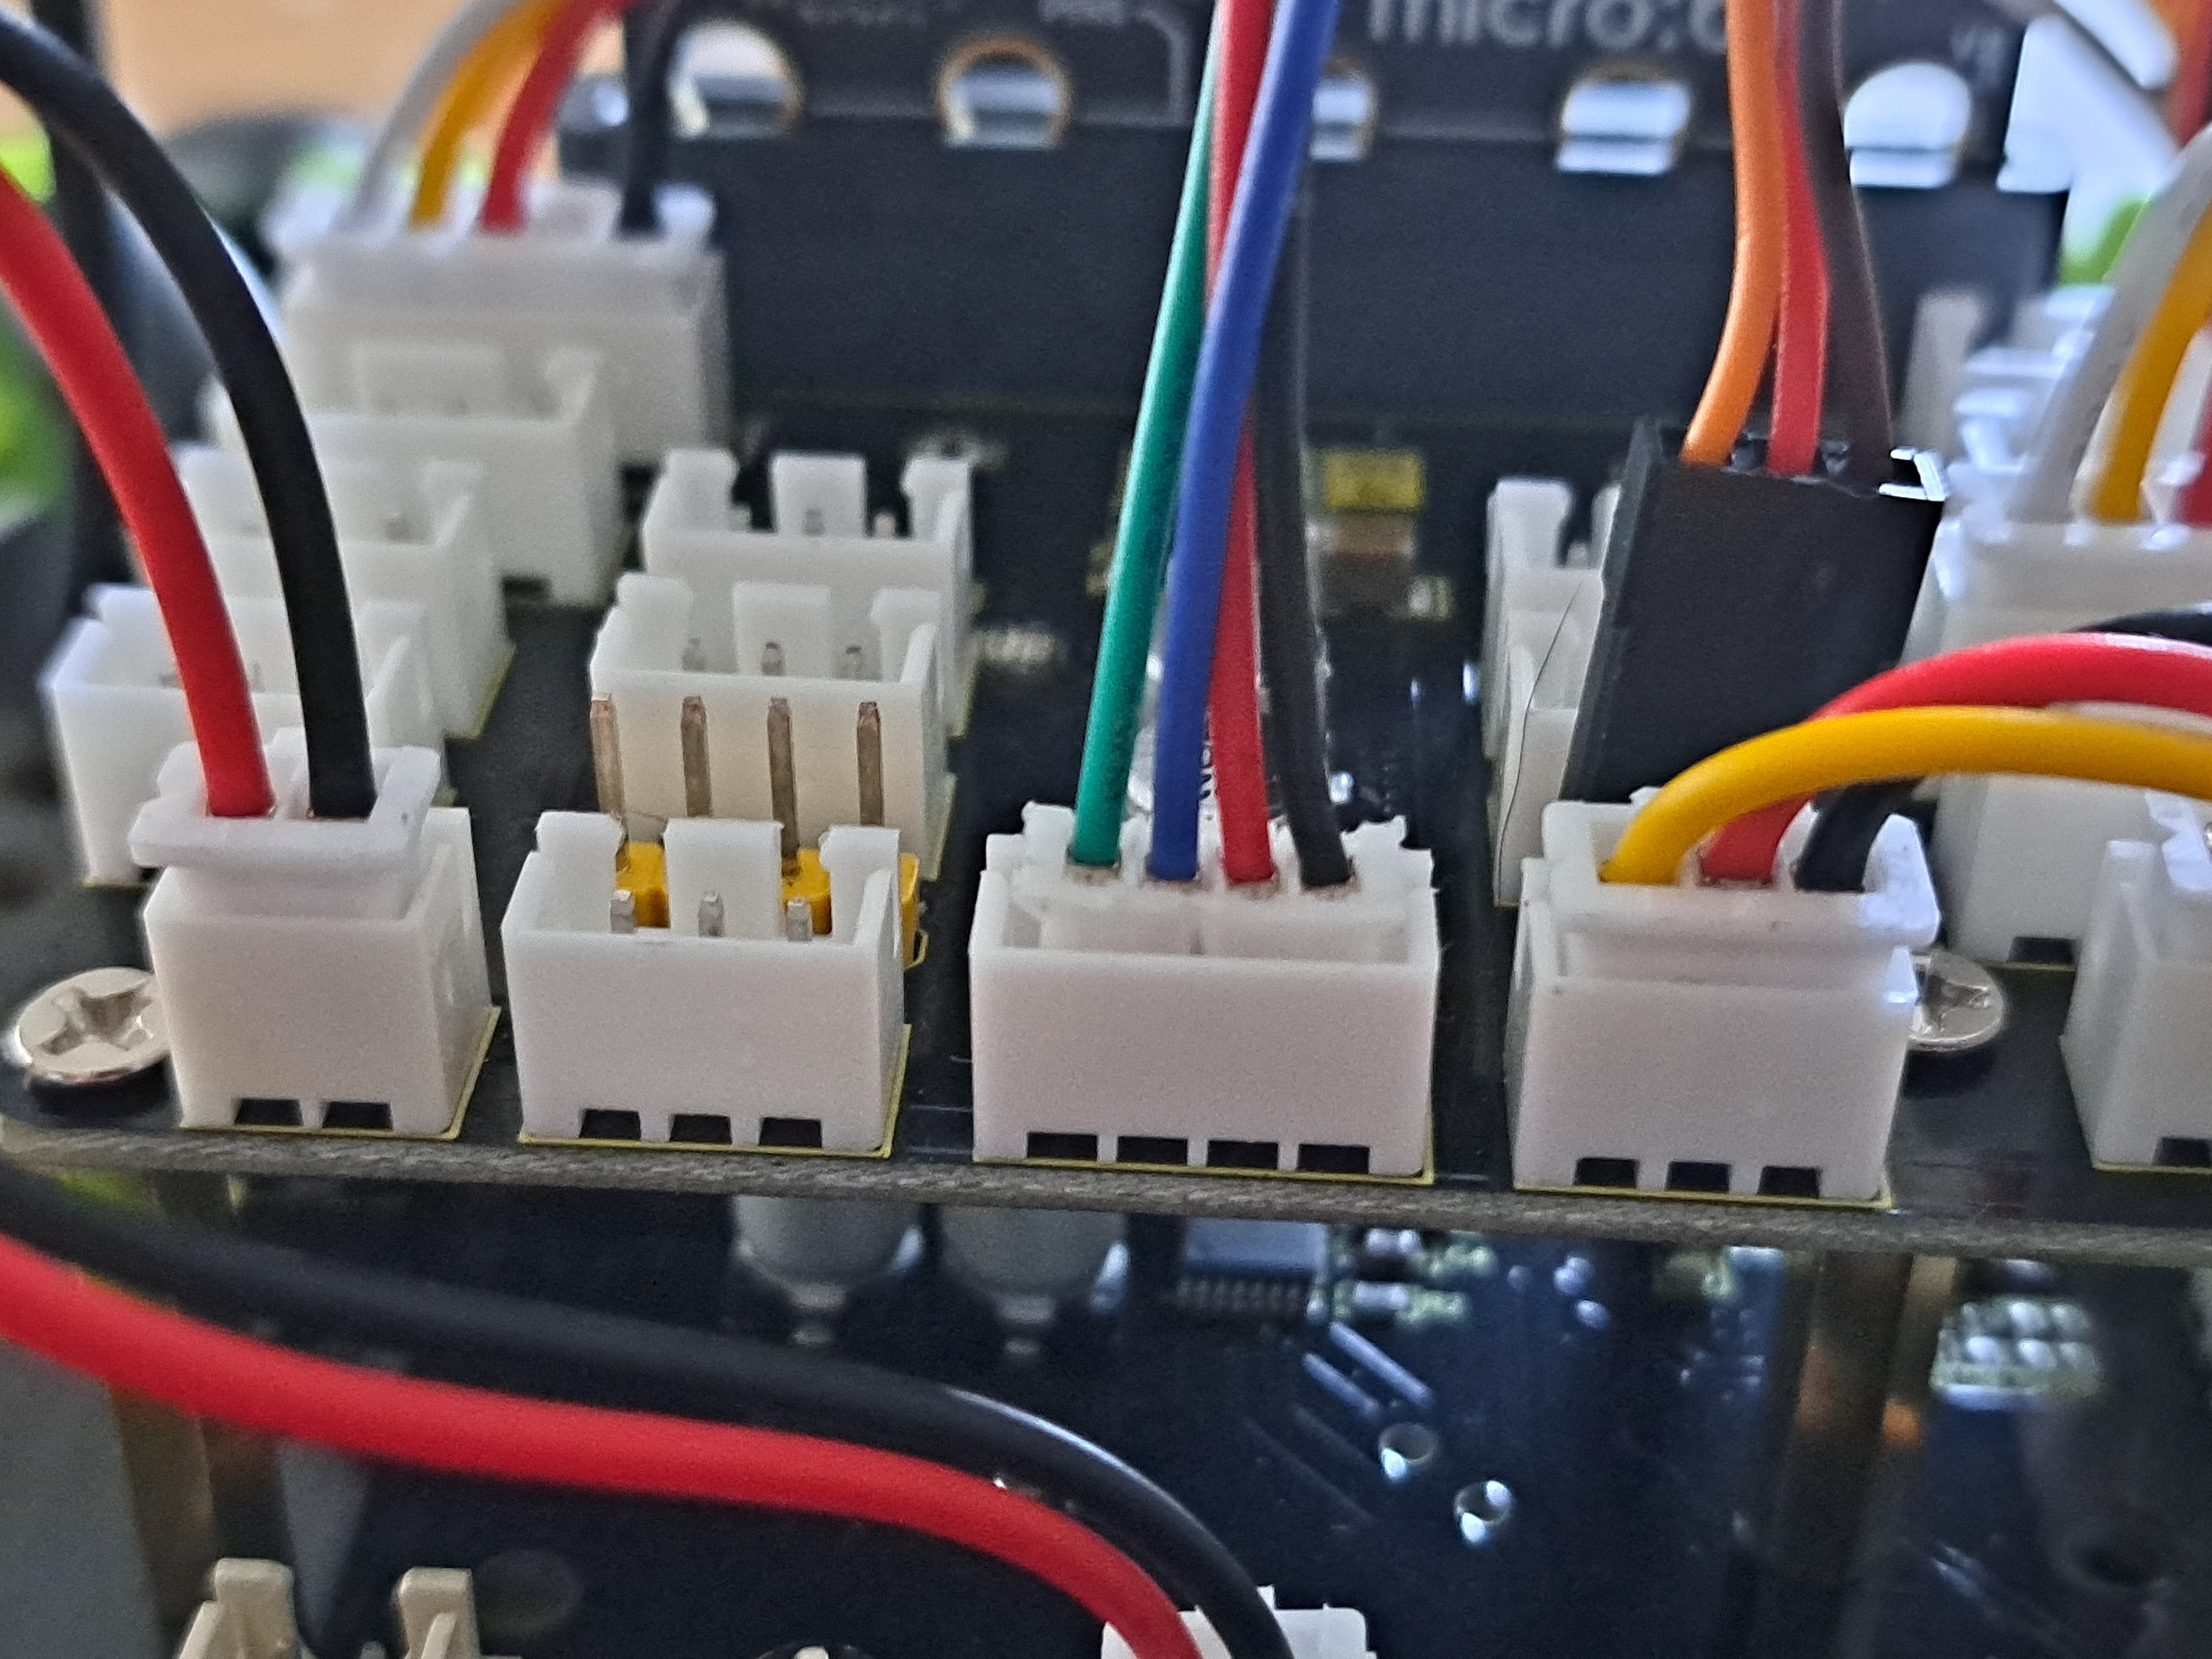 Connectors Fit Together Now